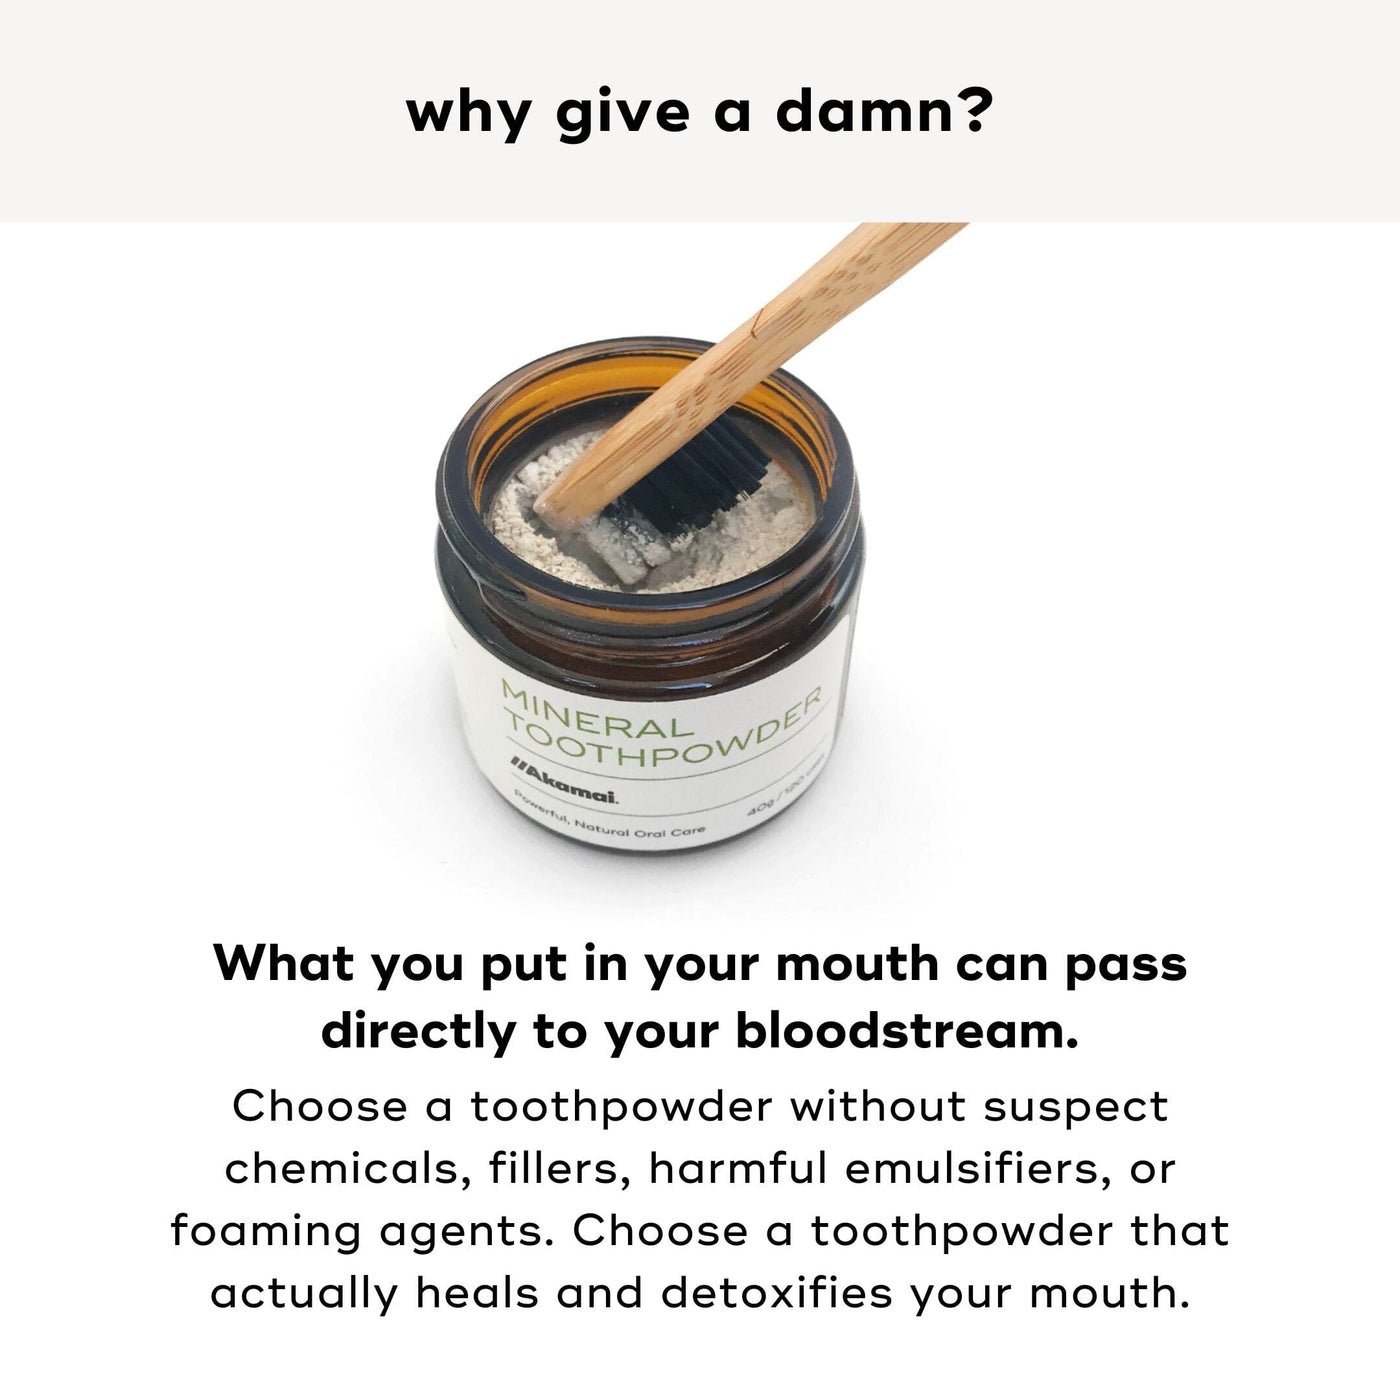 What you put in your mouth can pass directly to your bloodstream - carefully choose your toothpowder.